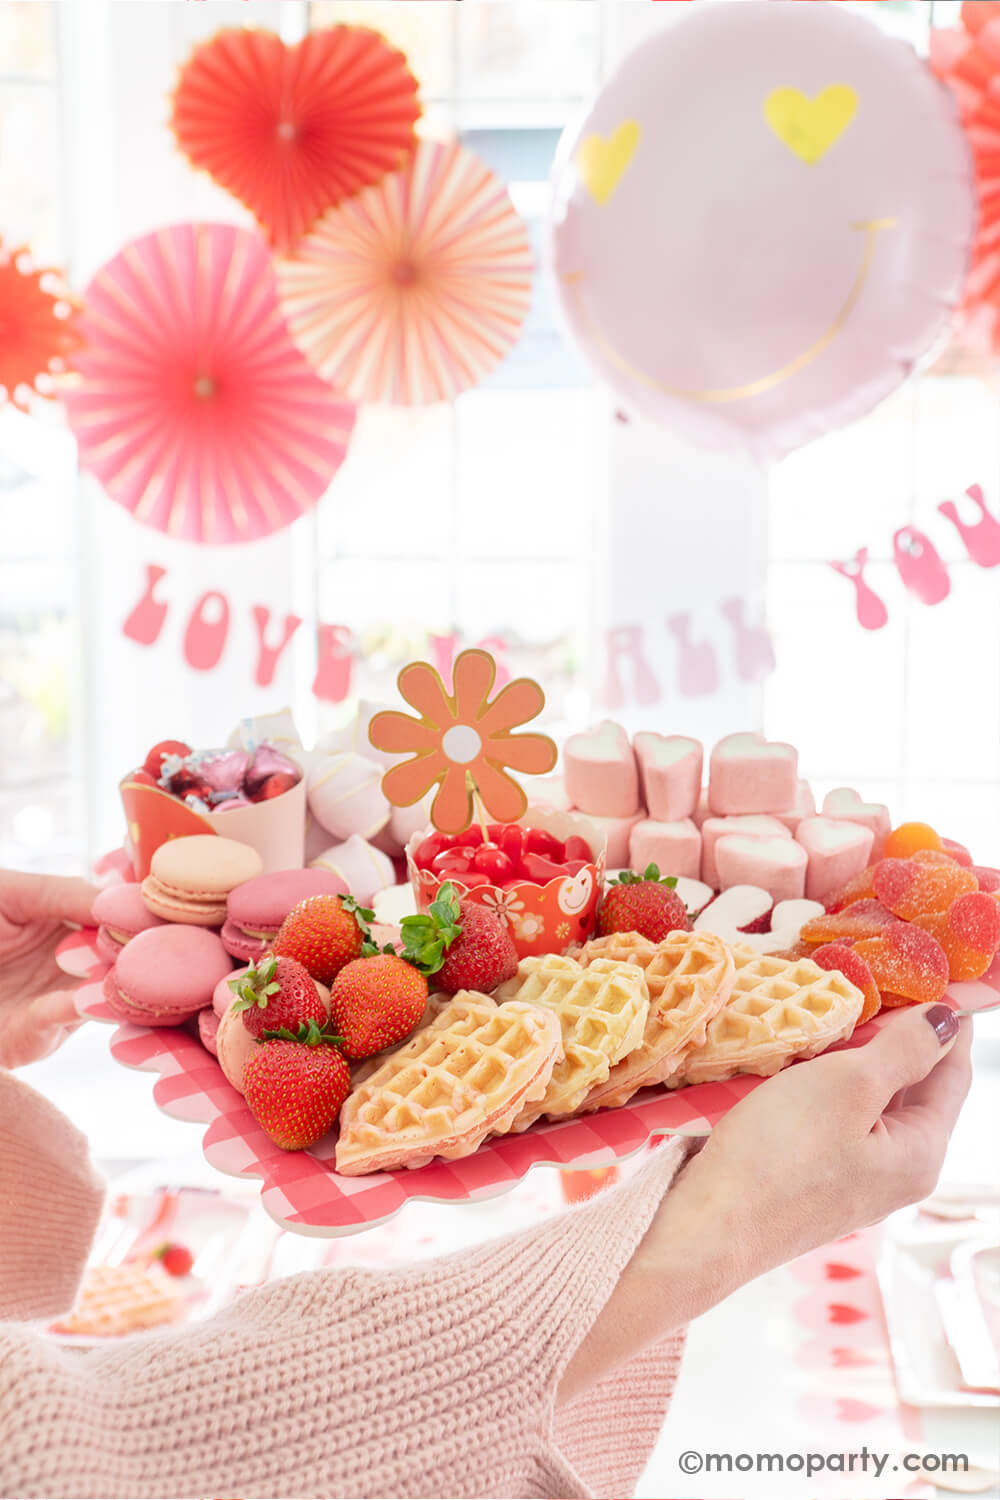 Momo Party presents a scene of Valentine's celebration, featuring a delightful setup where the party host lady holds a My Mind's Eye Checkered Heart-Shaped Tray. The tray is filled with a tempting array of Valentine's Day treats, including "I Love You" sugar cookies, macarons, strawberries, heart-shaped marshmallows, heart-shaped pink waffles, and candies. This charming display serves as the perfect inspiration for a Valentine's Day Dessert Charcuterie Board